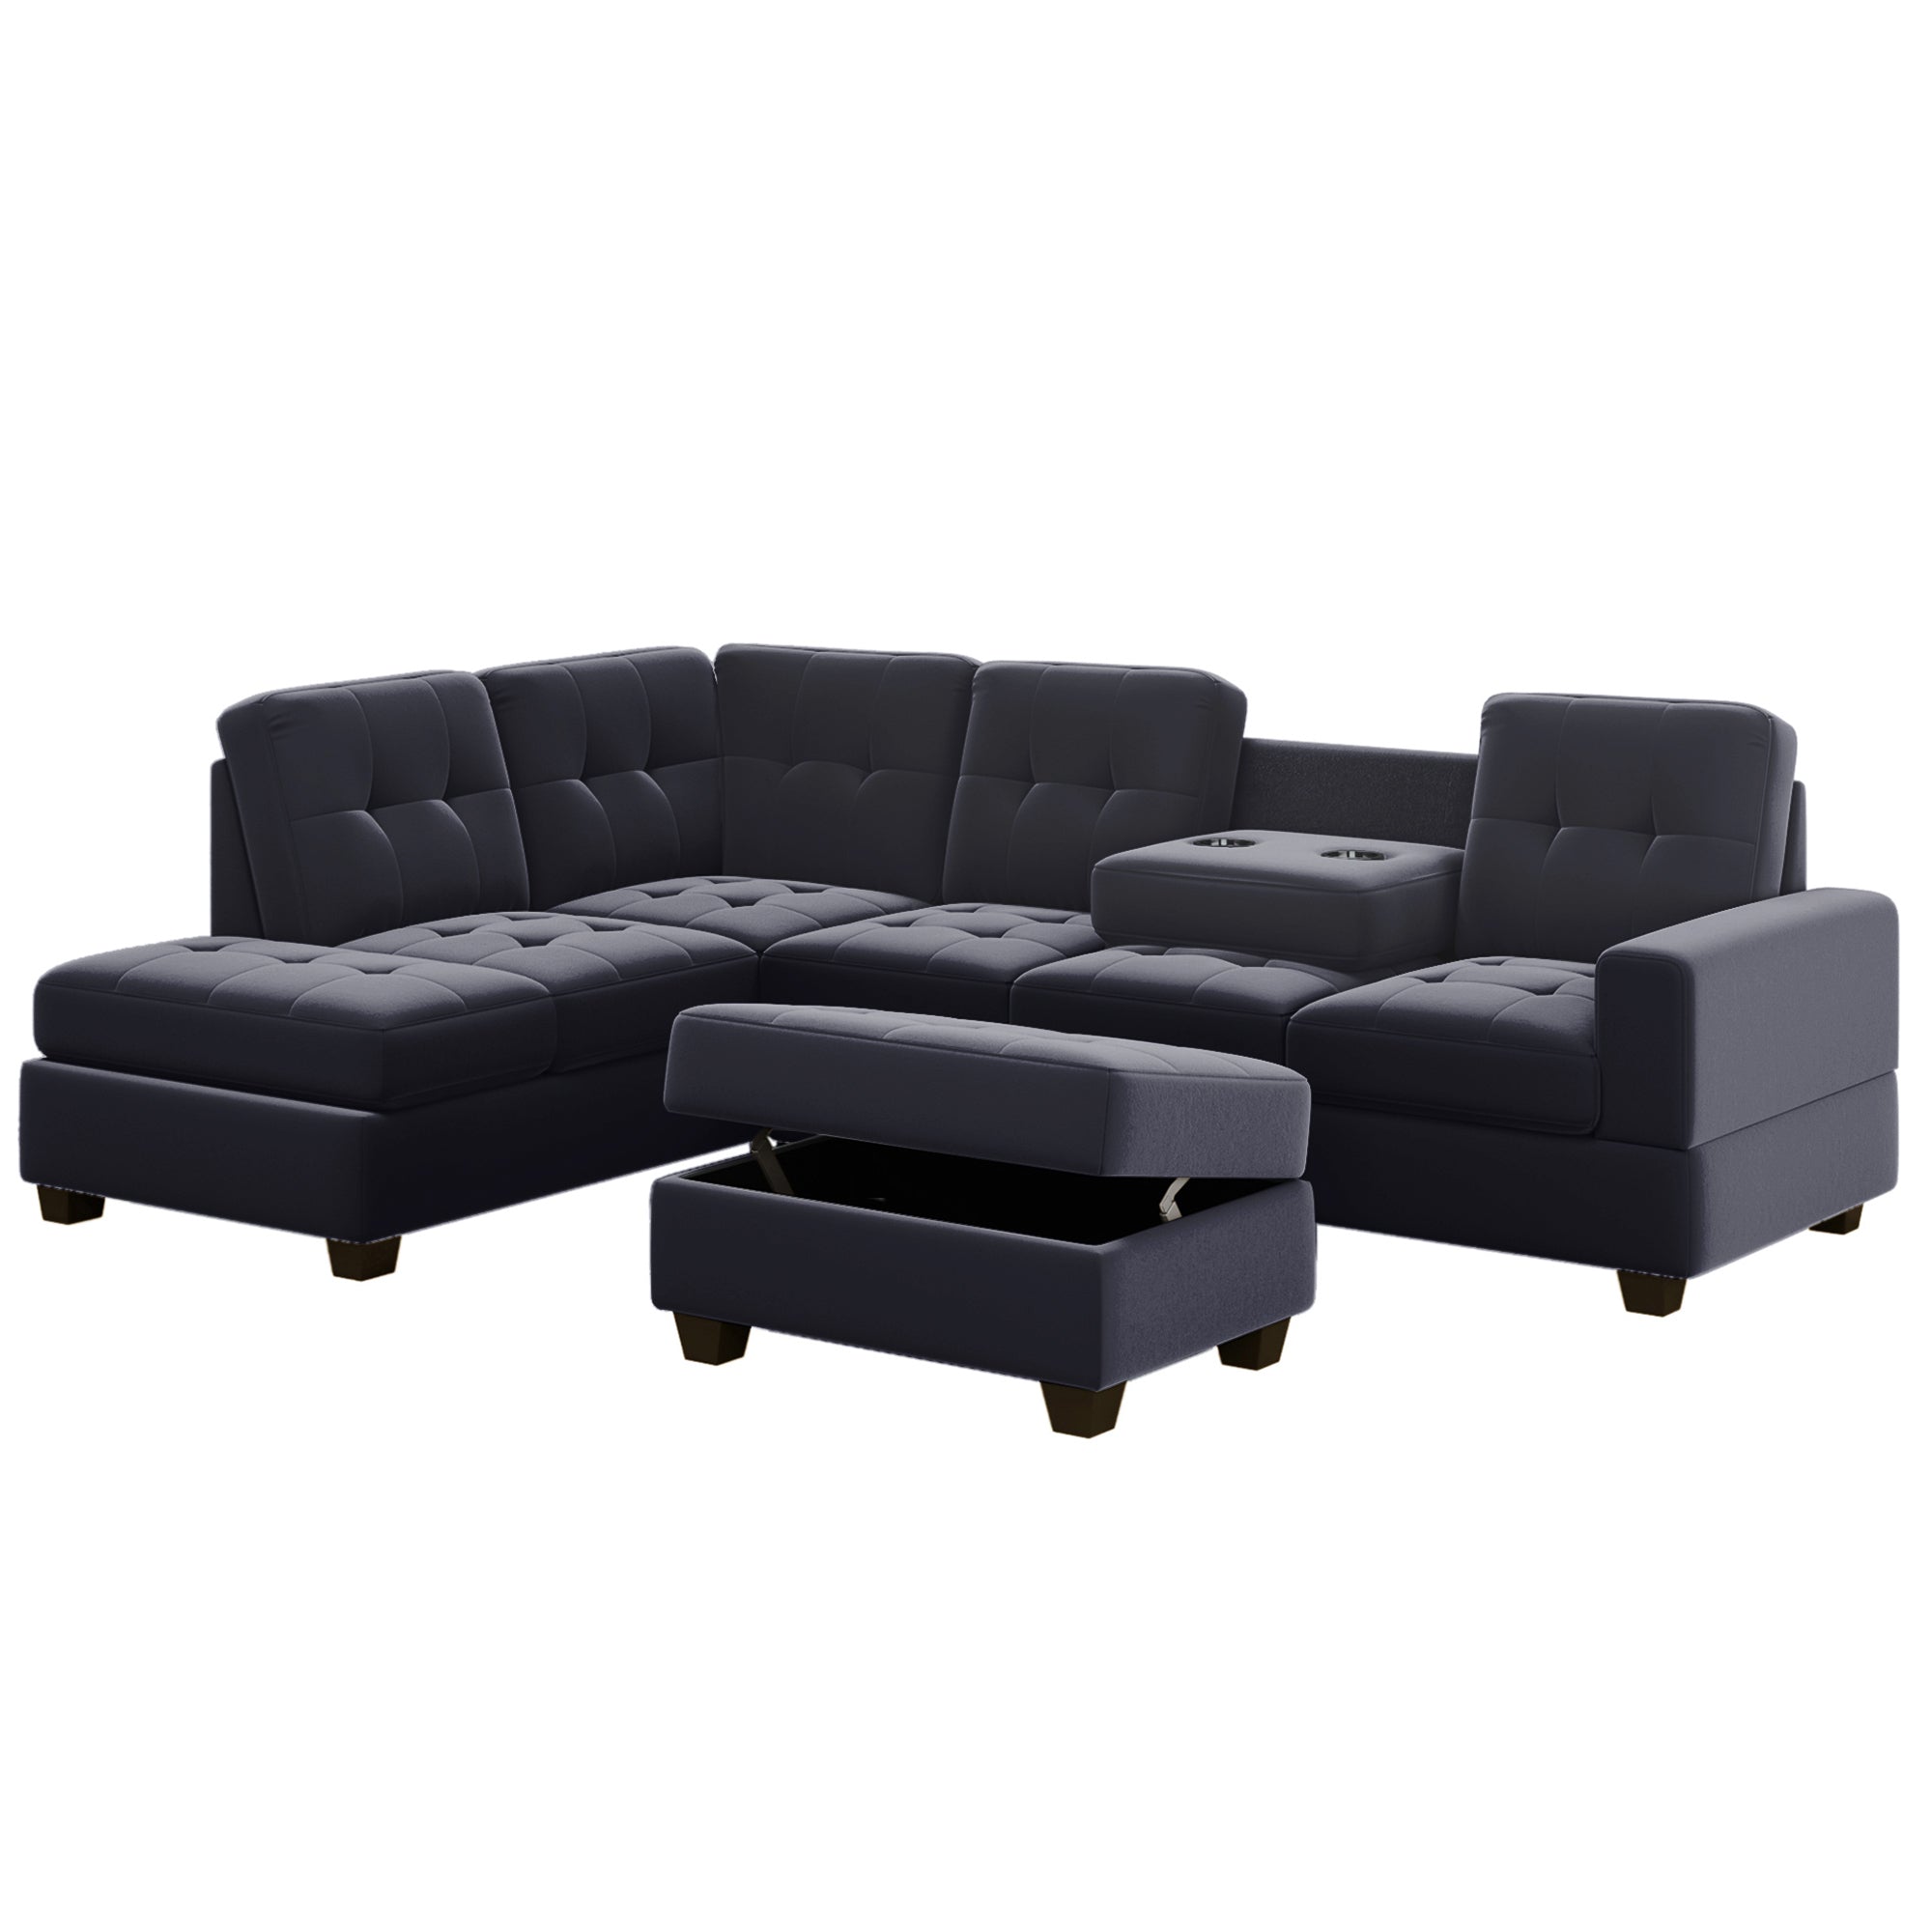 Orisfur Modern Sectional Sofa with Reversible Chaise | L-Shaped Couch Set with Storage Ottoman and Two Cup Holders | Stylish and Functional for Living Room